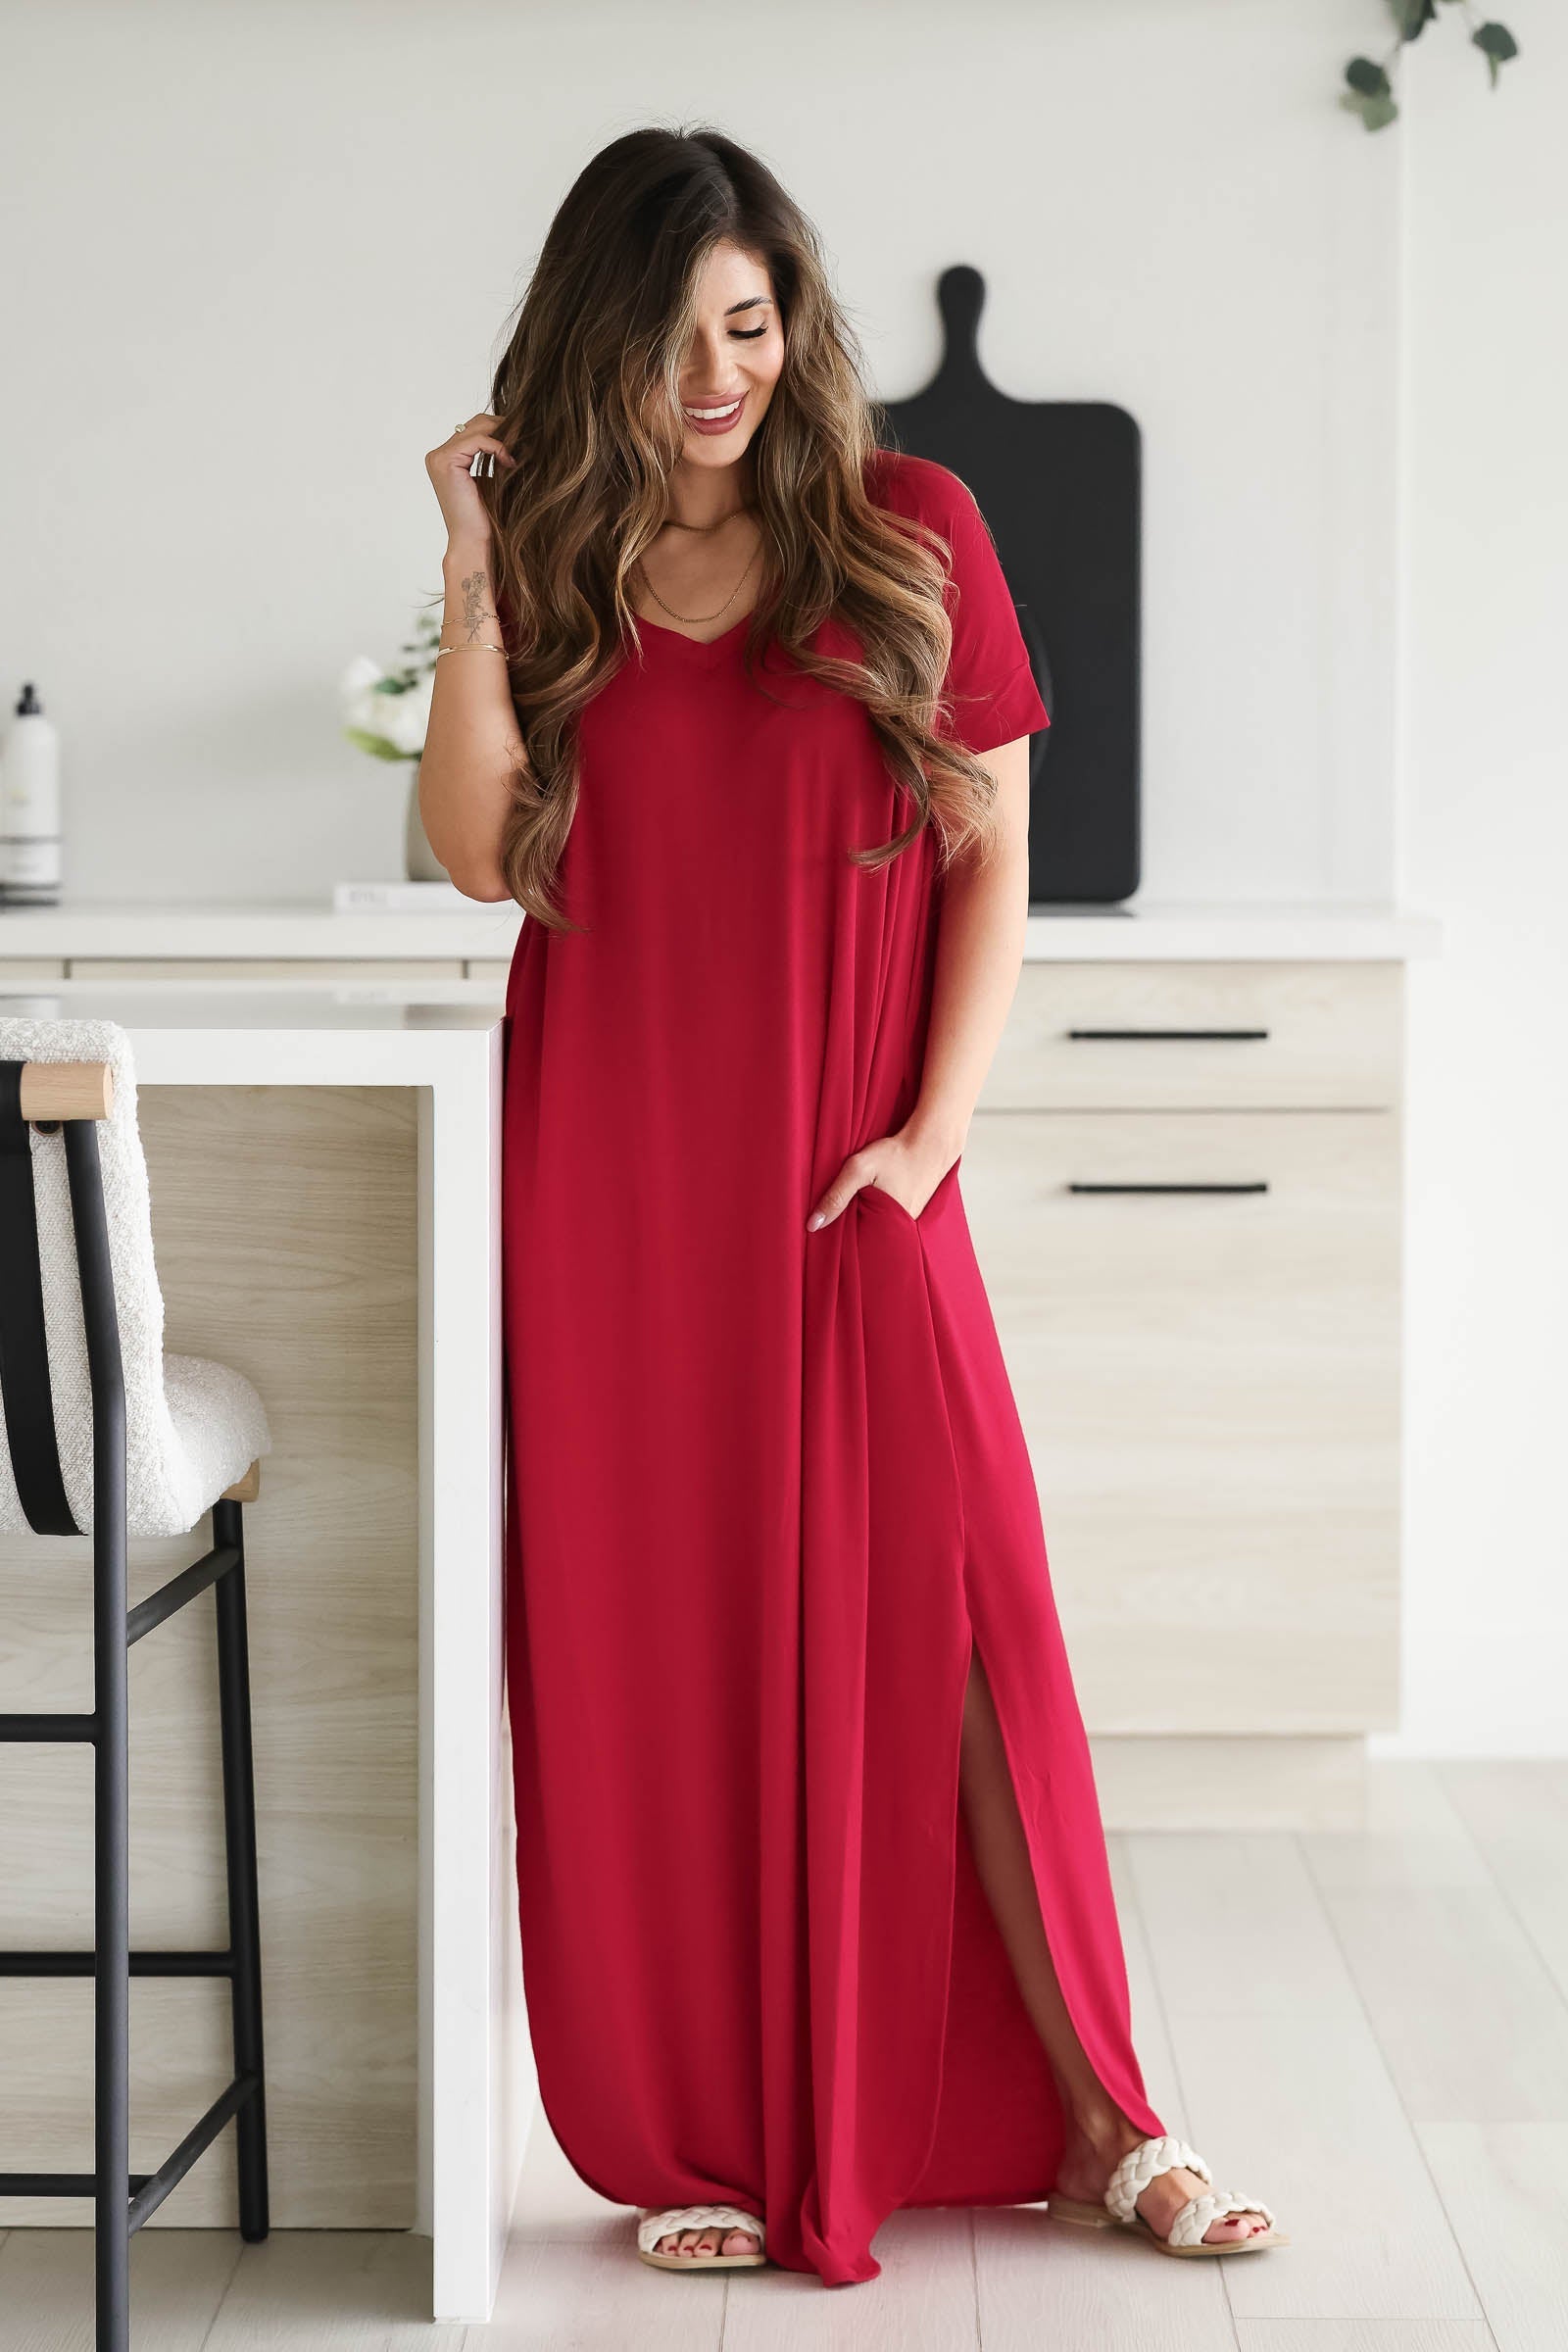 I'll Be By The Pool Maxi Dress - Burgundy, Closet Candy, 1